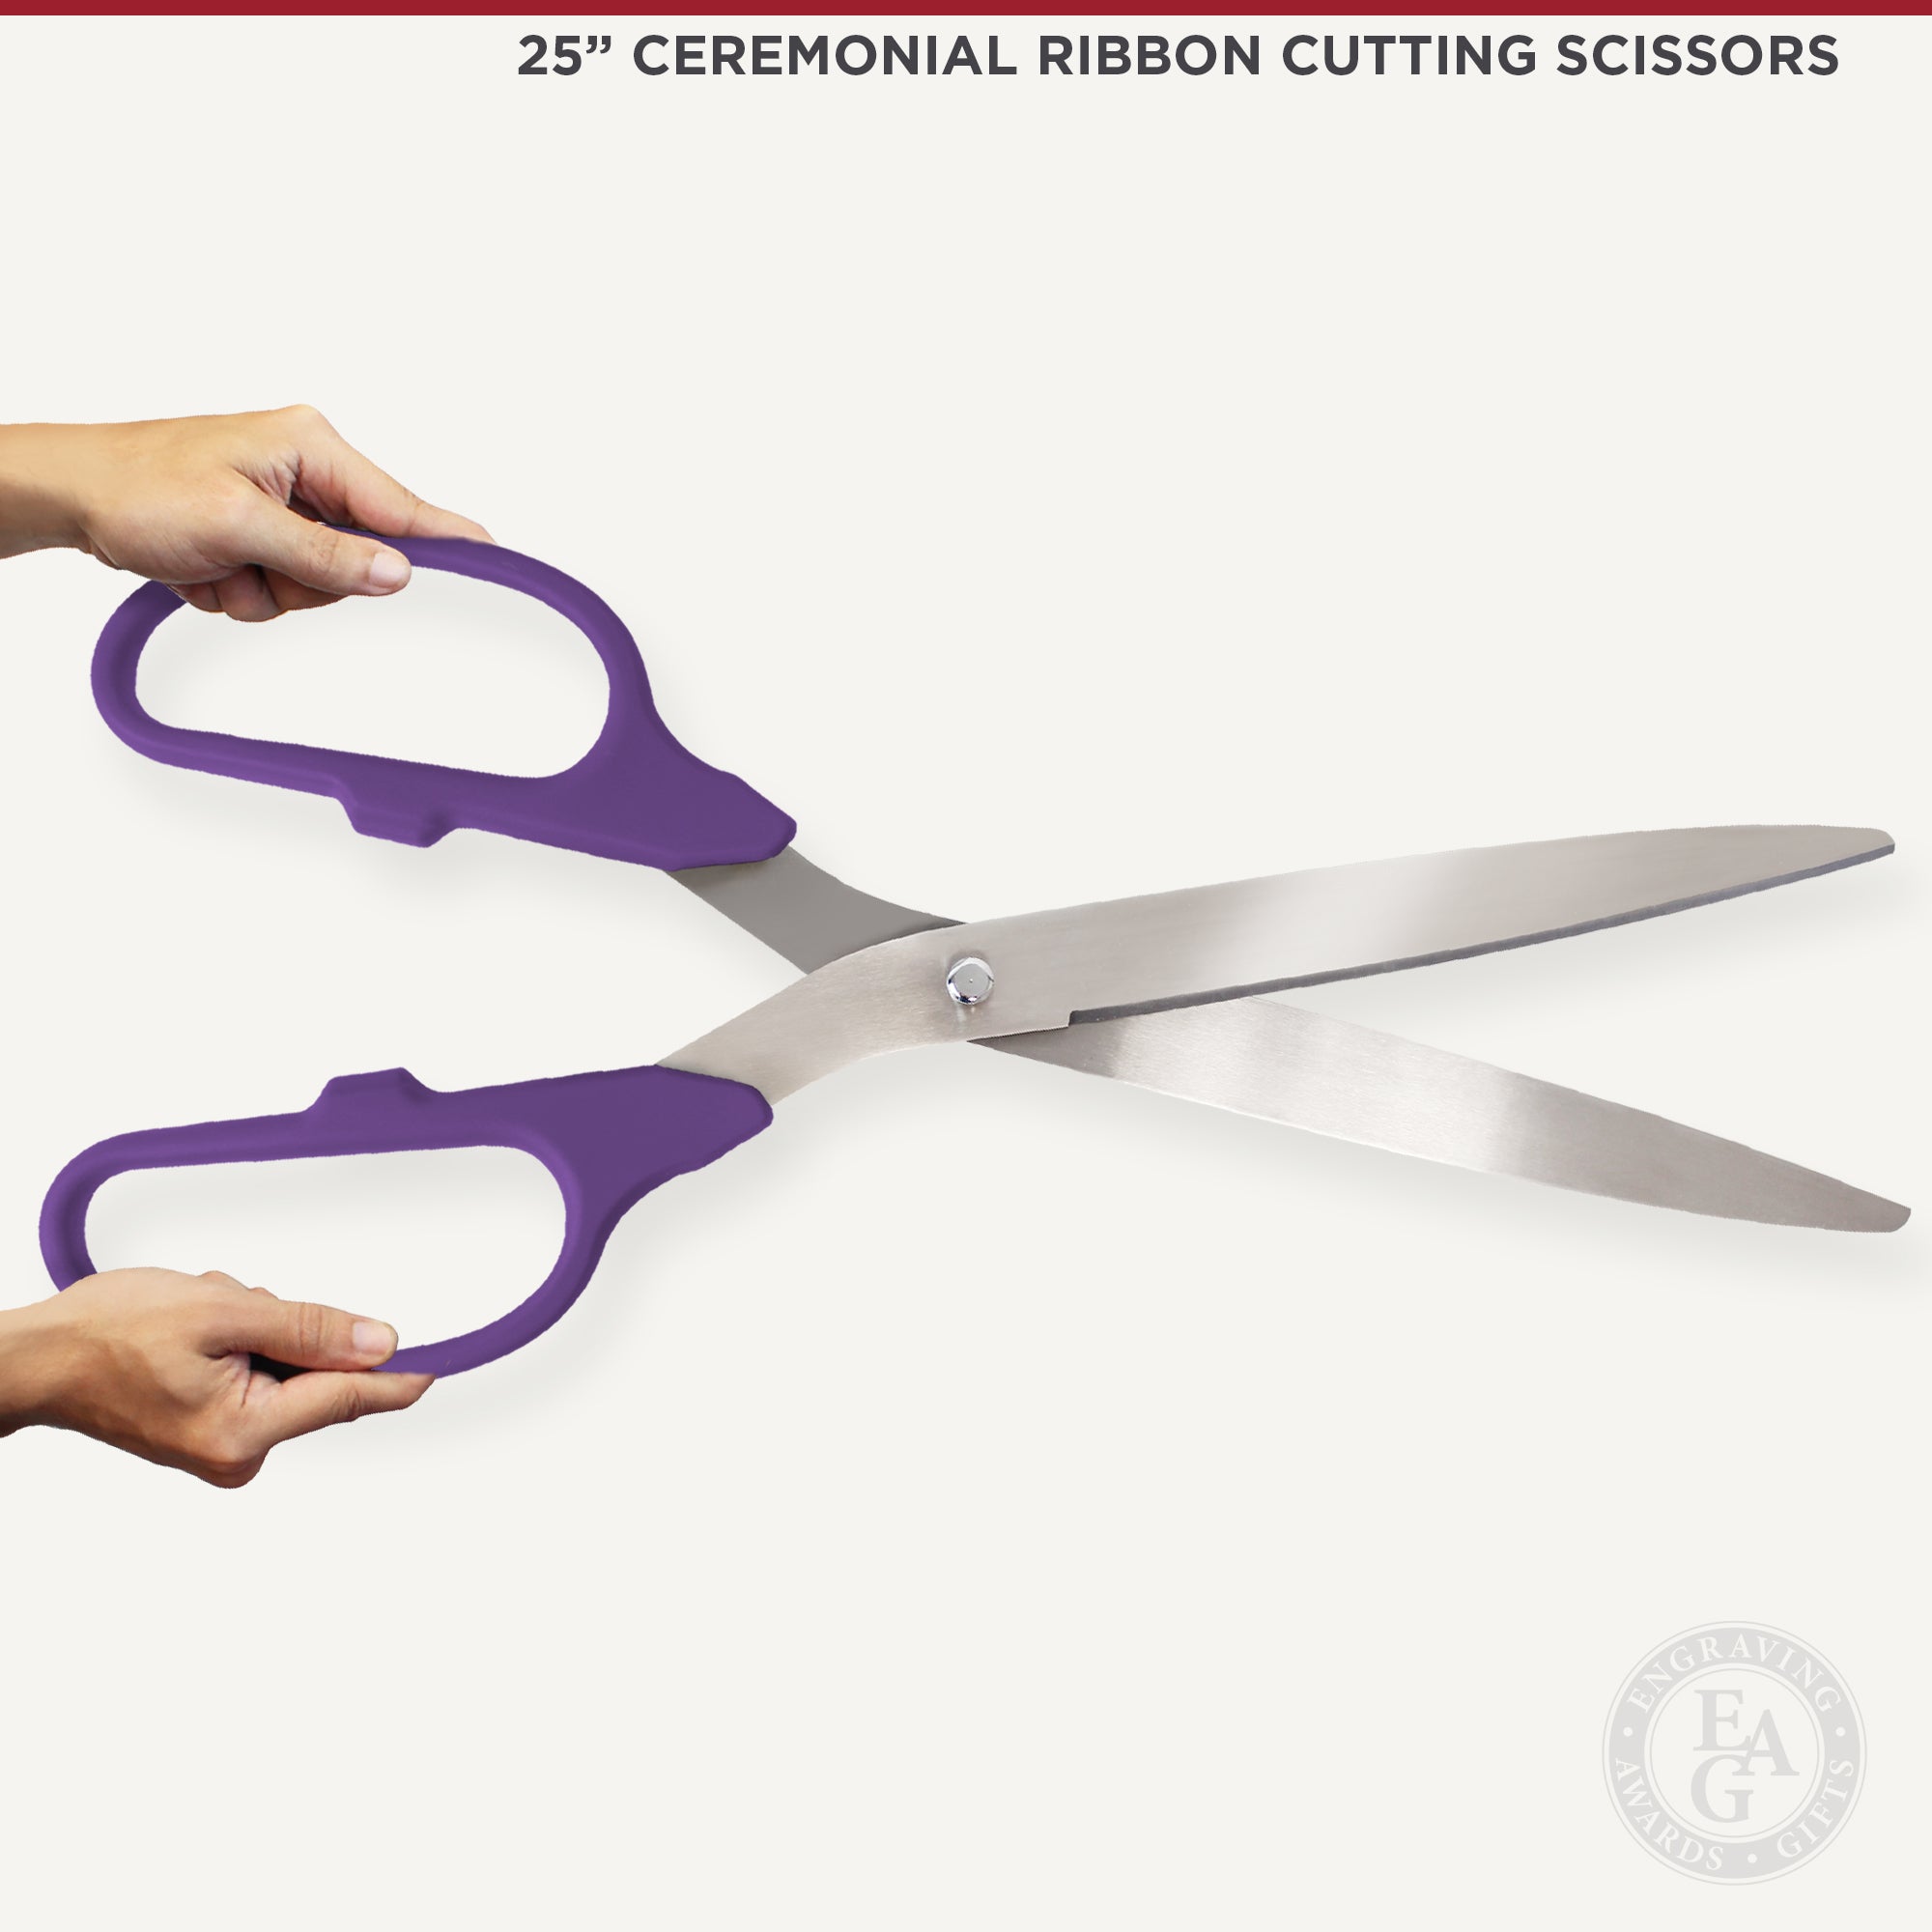 Giant Scissors they Actually Cut Any Color. Giant Scissors 26 for